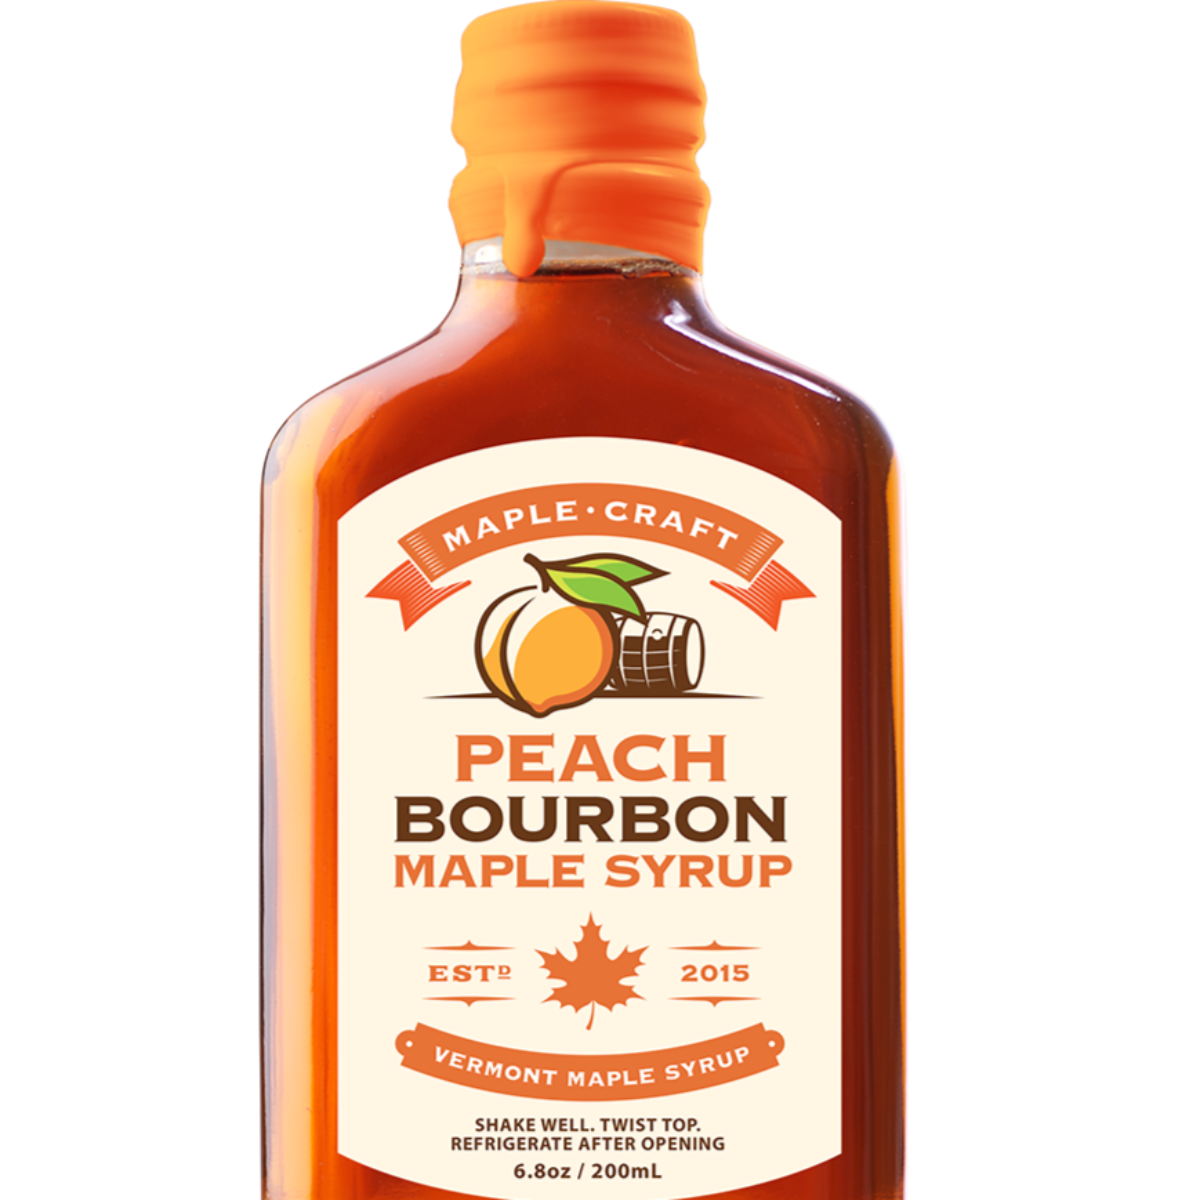 Peach Bourbon Maple Syrup- Perfect for ice cream or pancakes